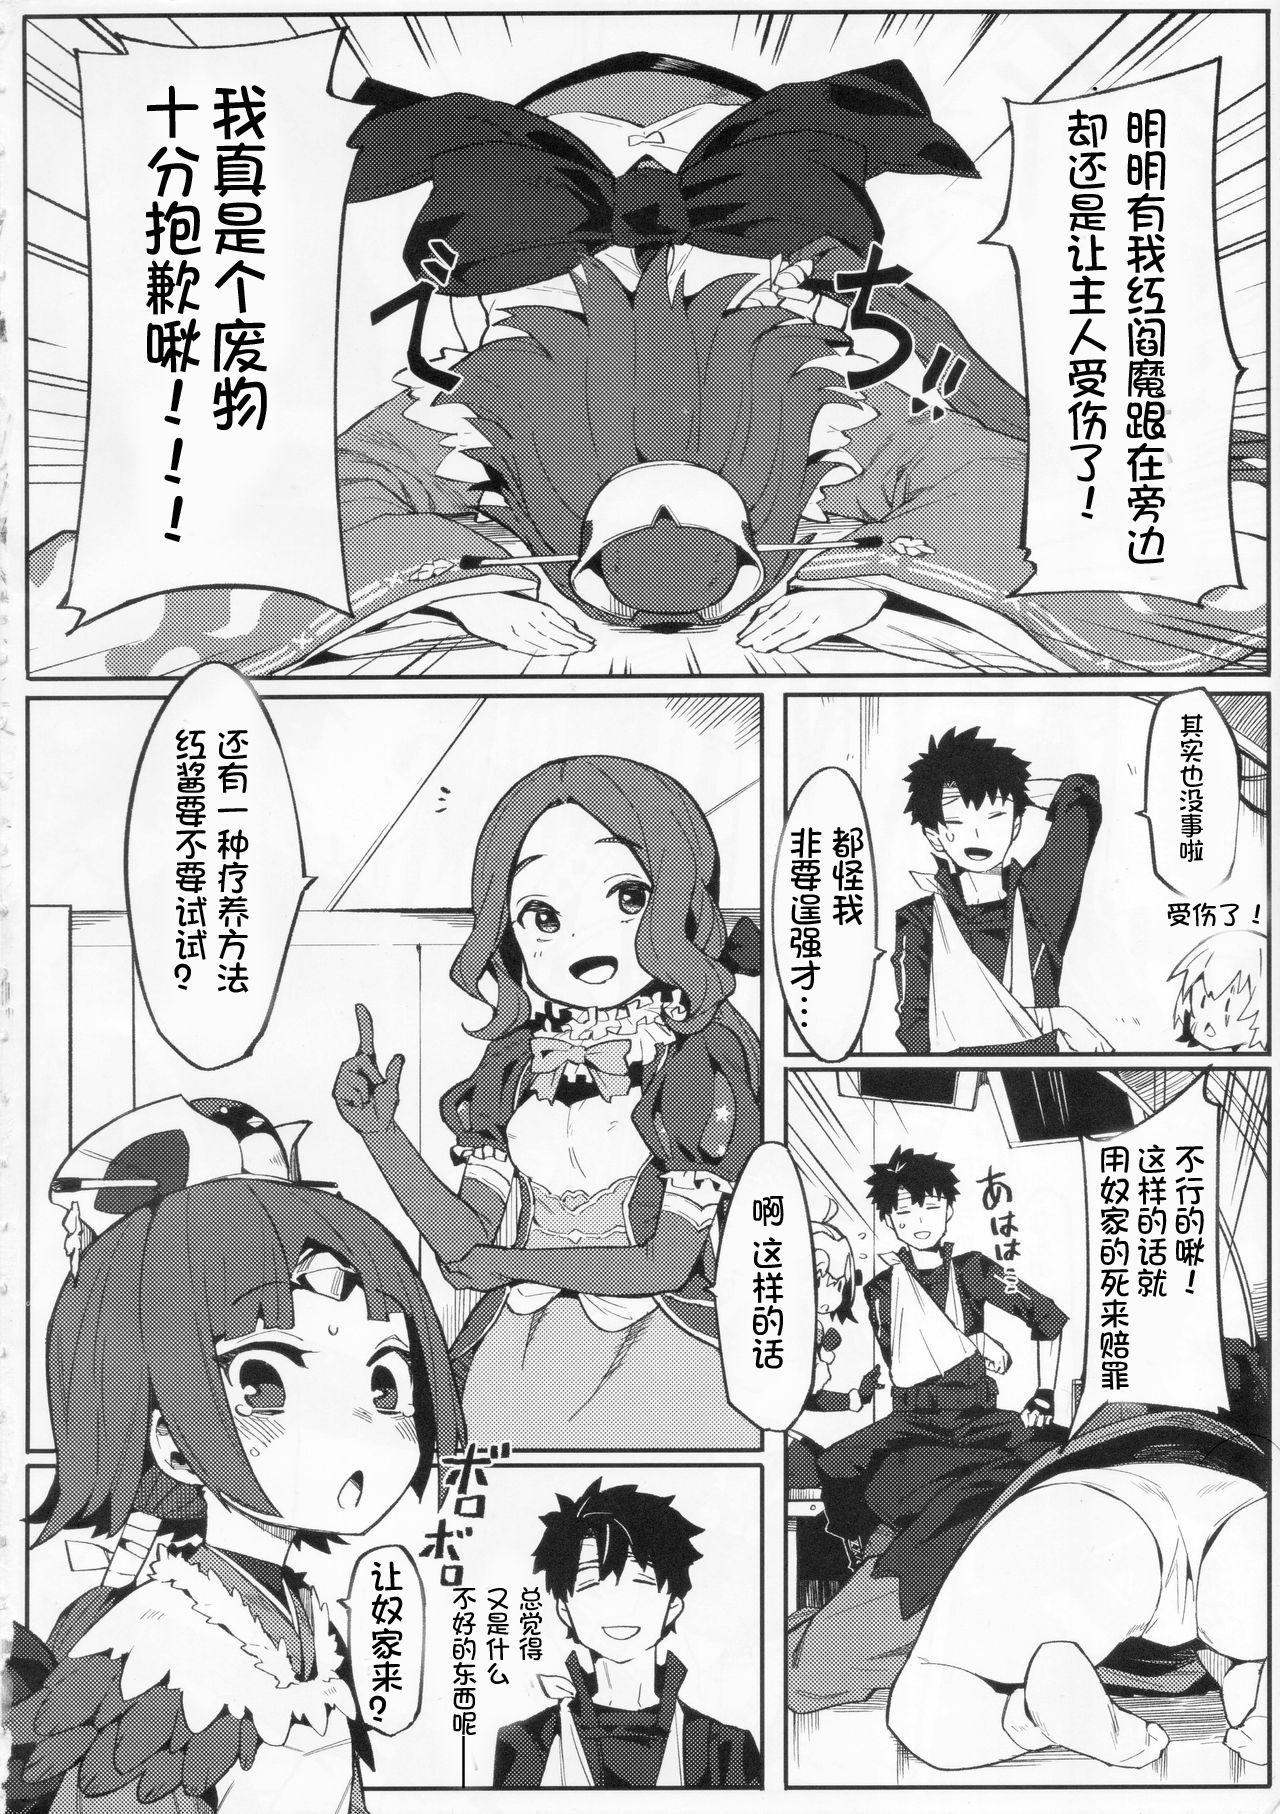 Ass Licking Enmatei Ryouyou-ki - Fate grand order Fit - Page 4